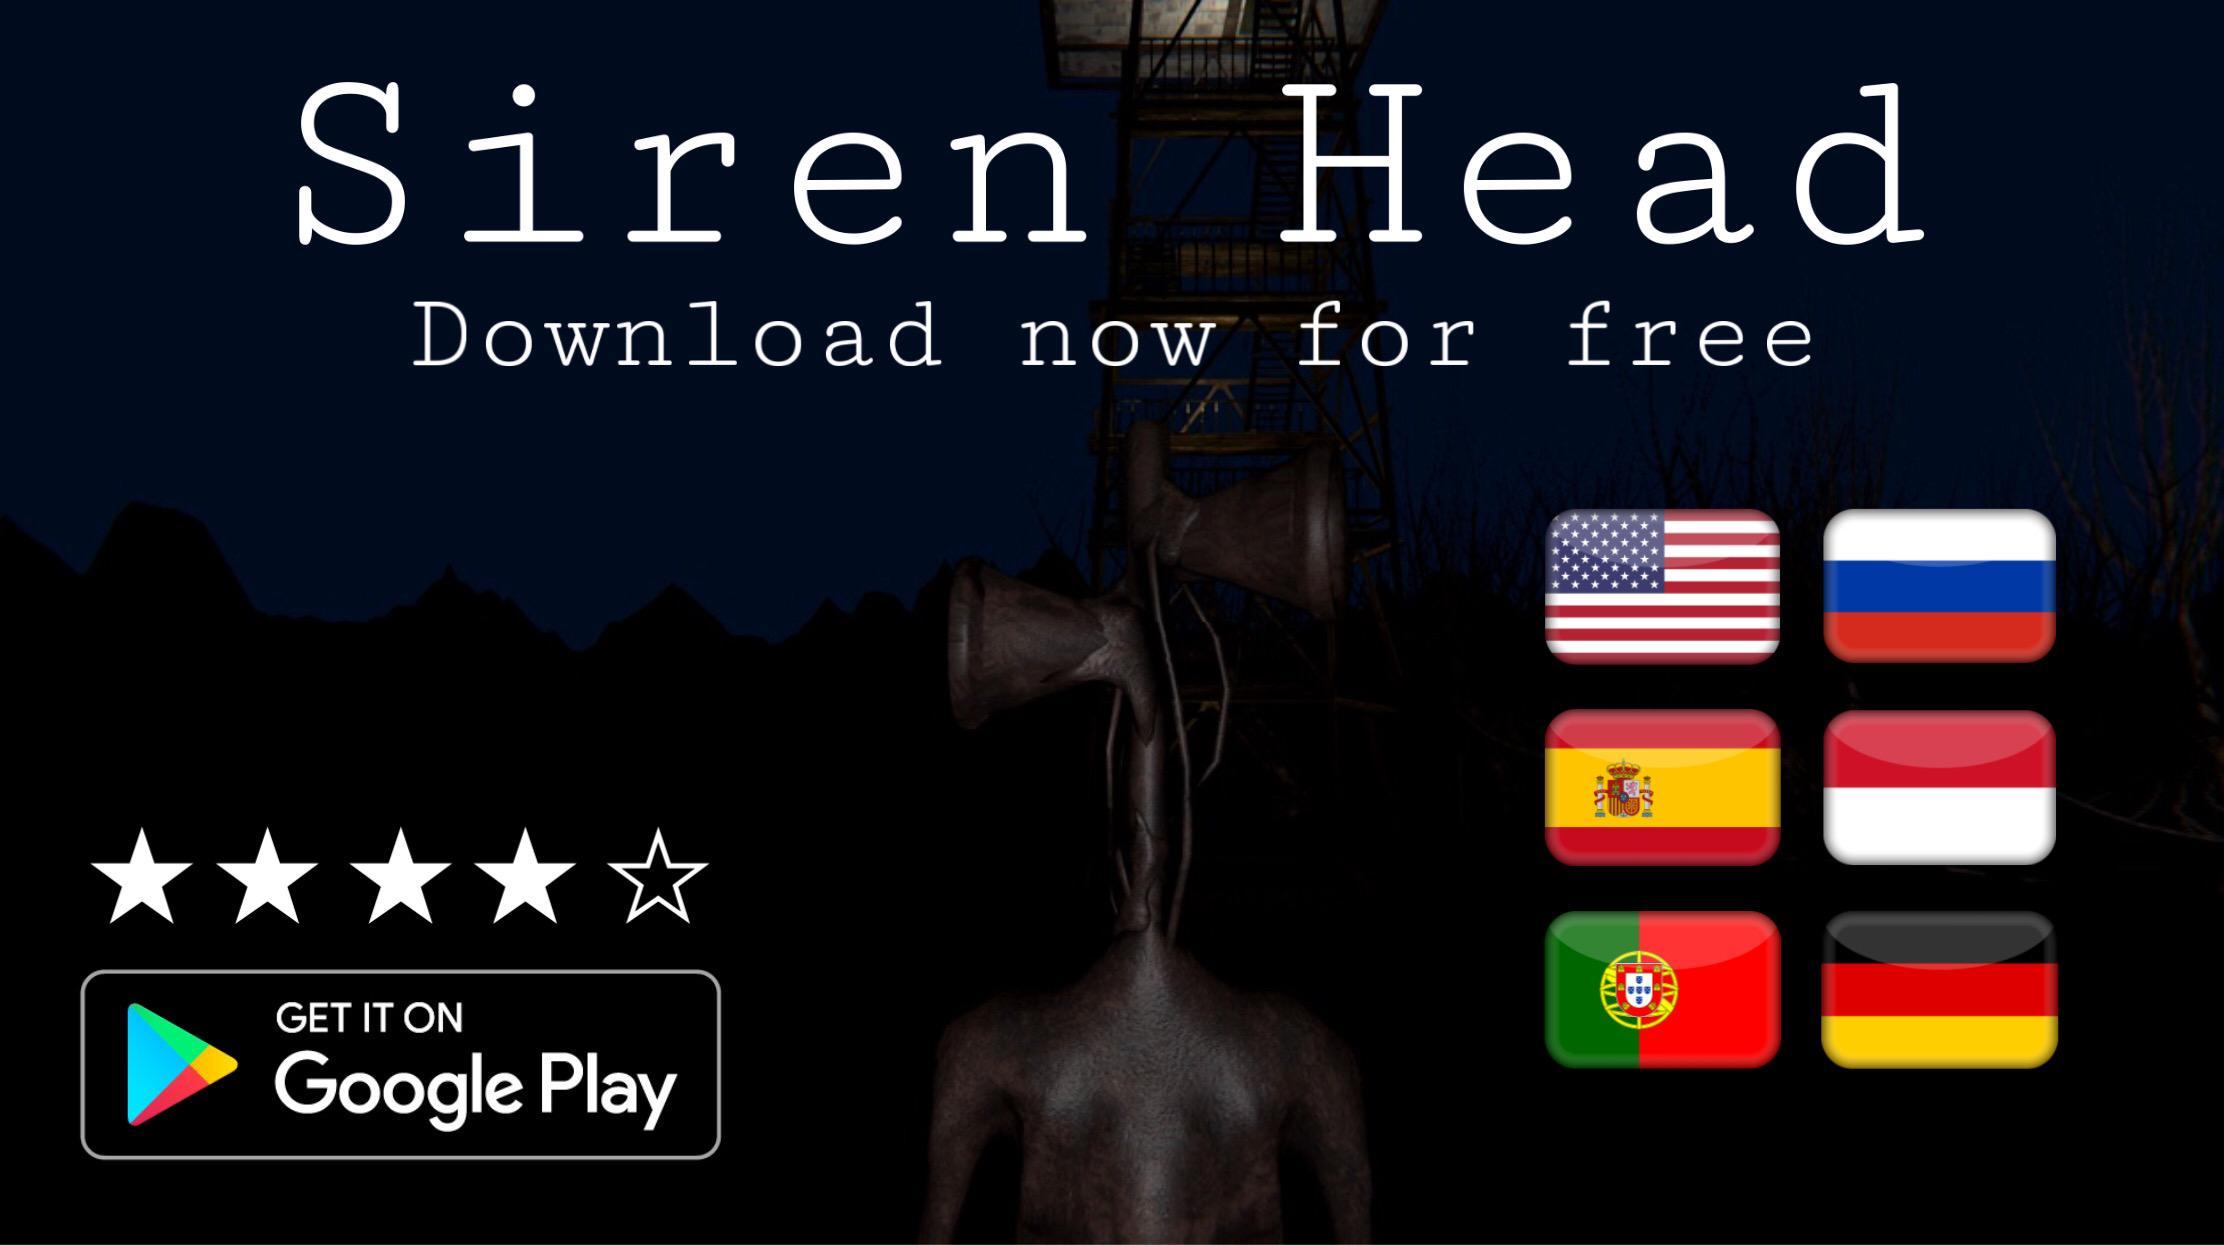 Siren Head Horror Game SCP 6789 MOD - Download do APK para Android